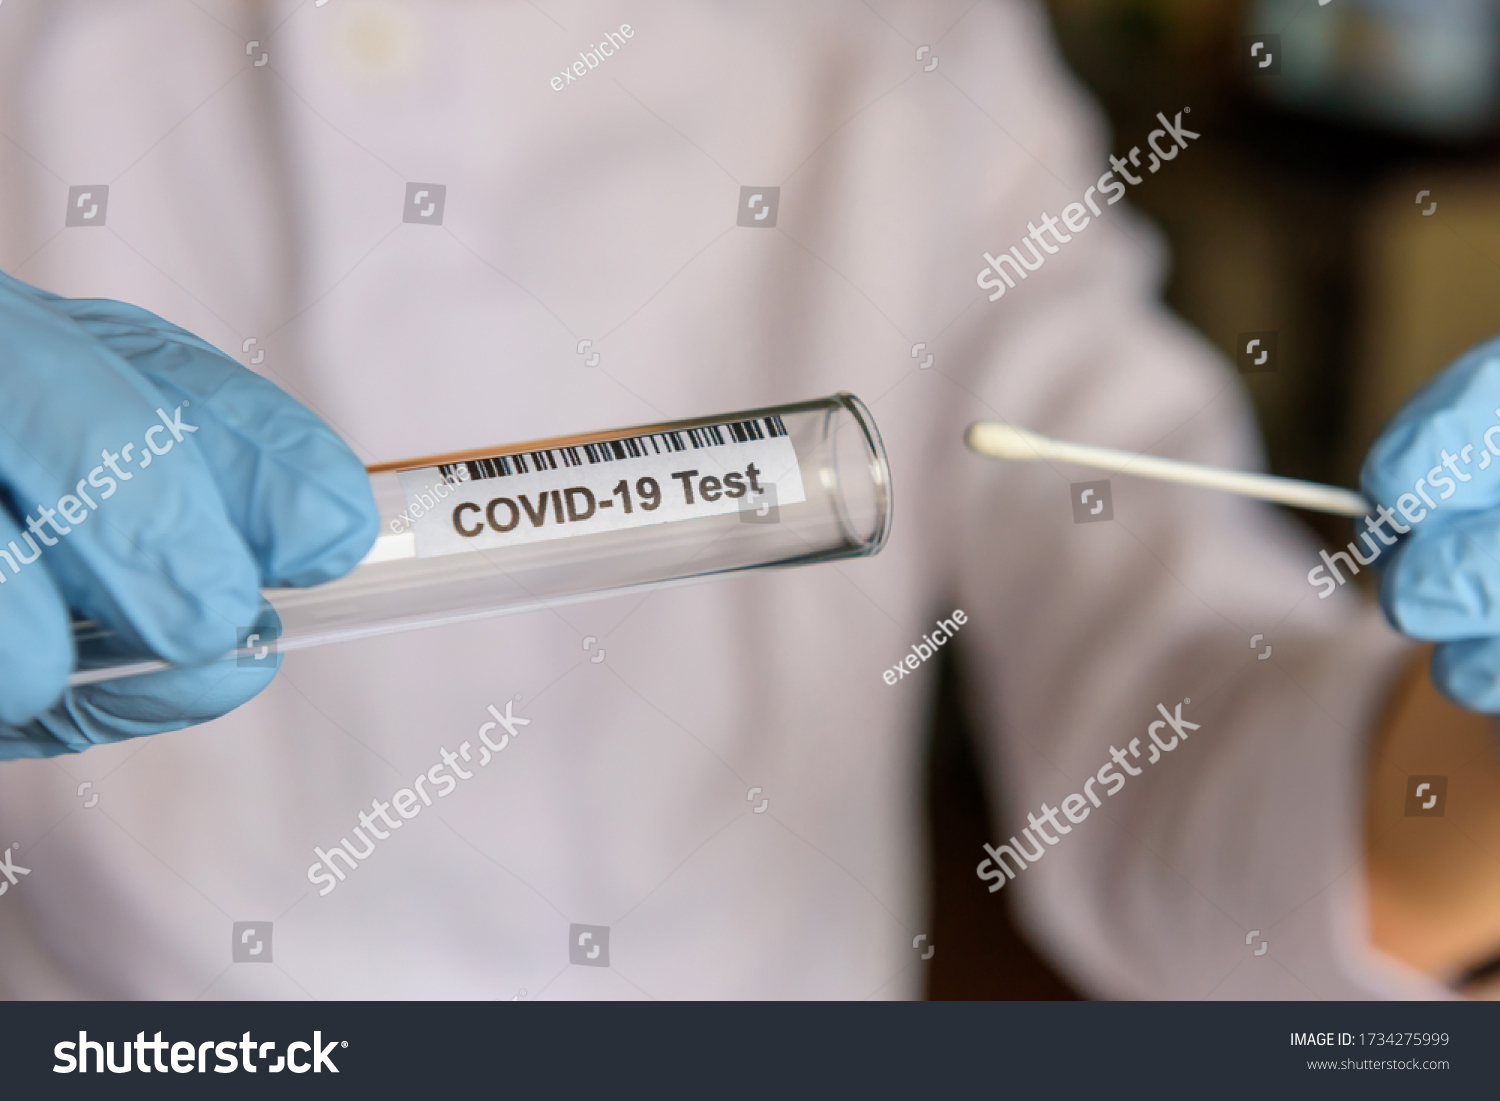 Medical worker holding swab sample collection kit, test tube for performing patient nasal swabbing. Hands in gloves holding testing equipment for Coronavirus COVID-19 diagnostic. #1734275999